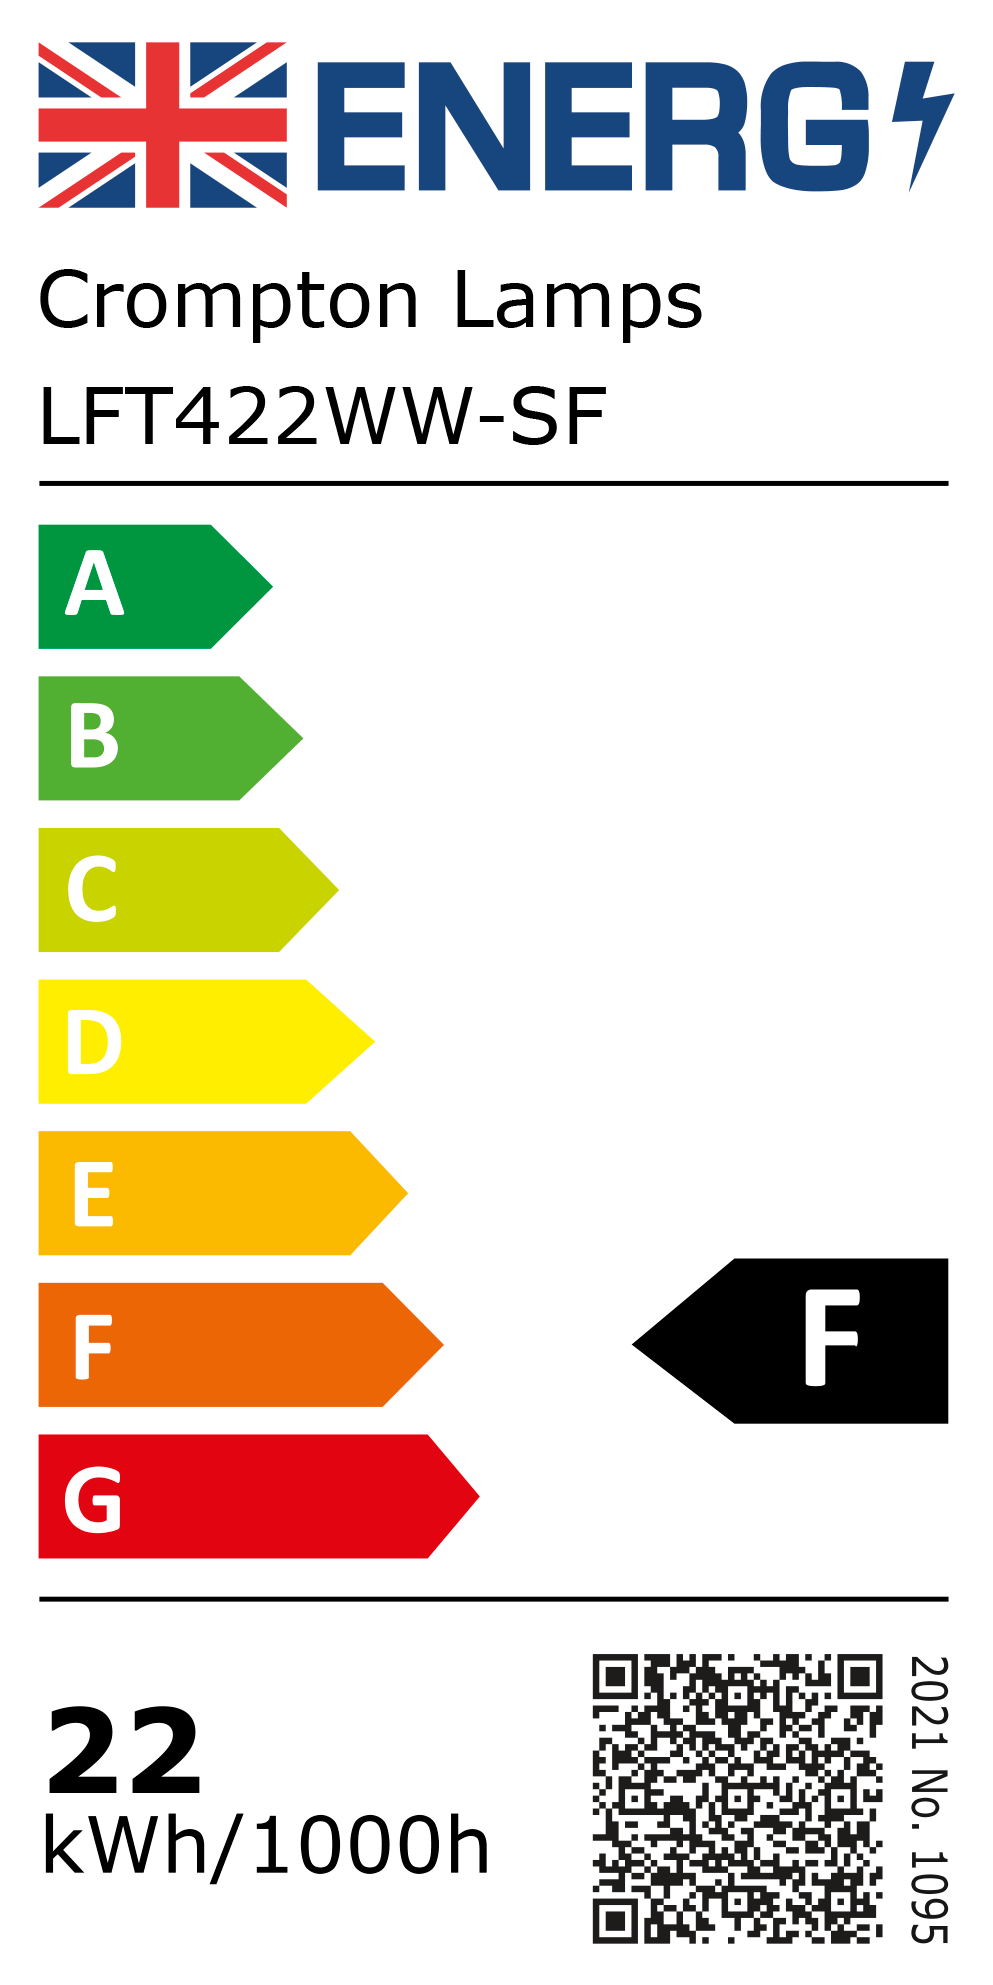 New 2021 Energy Rating Label: Stock Code LFT422WW-SF